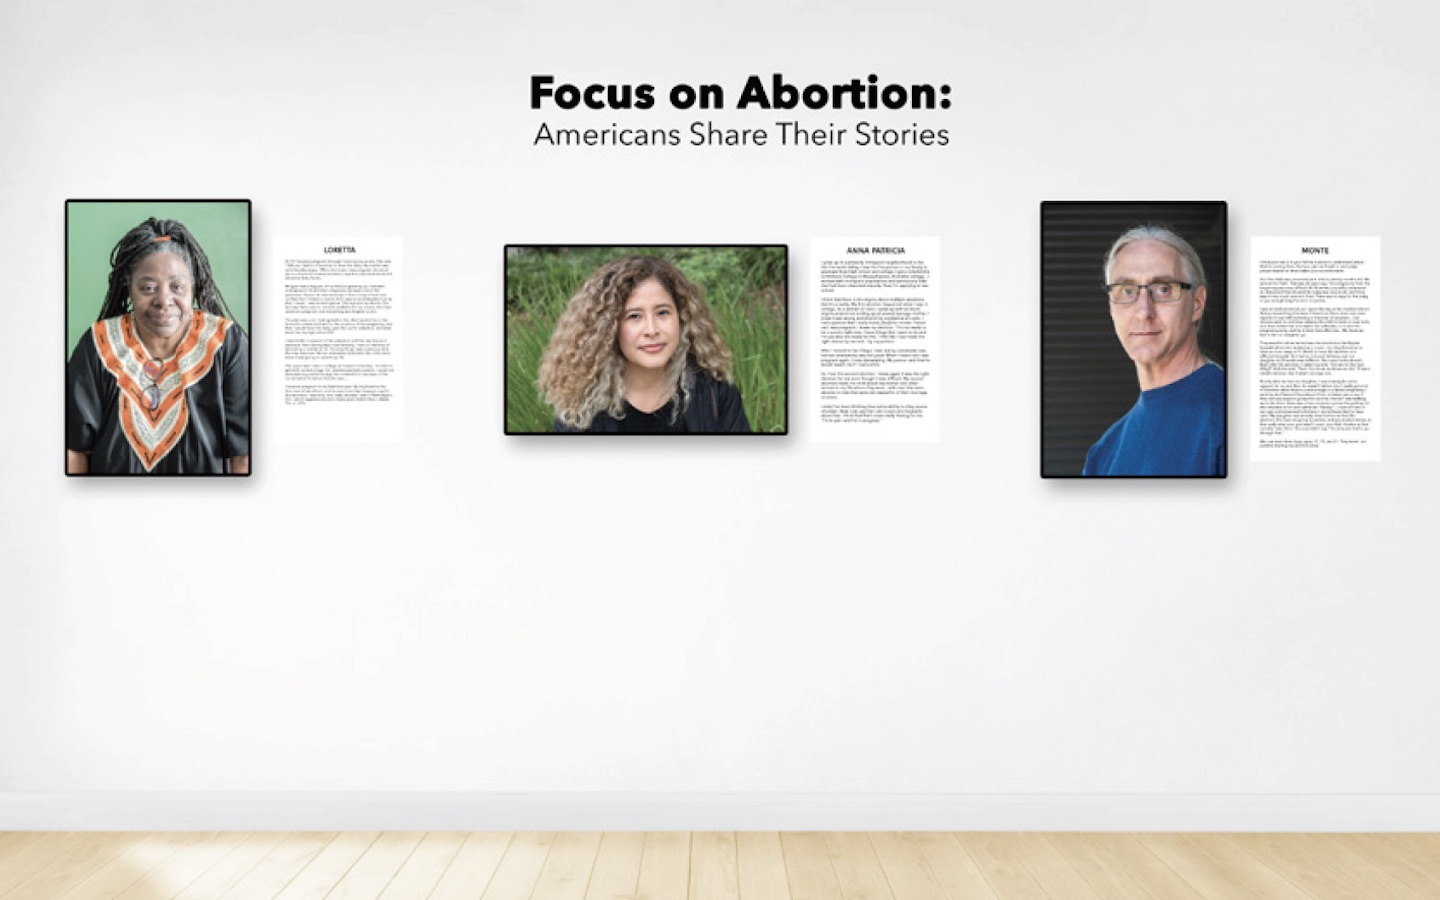 Gallery of photos from the Focus on Abortion exhibit